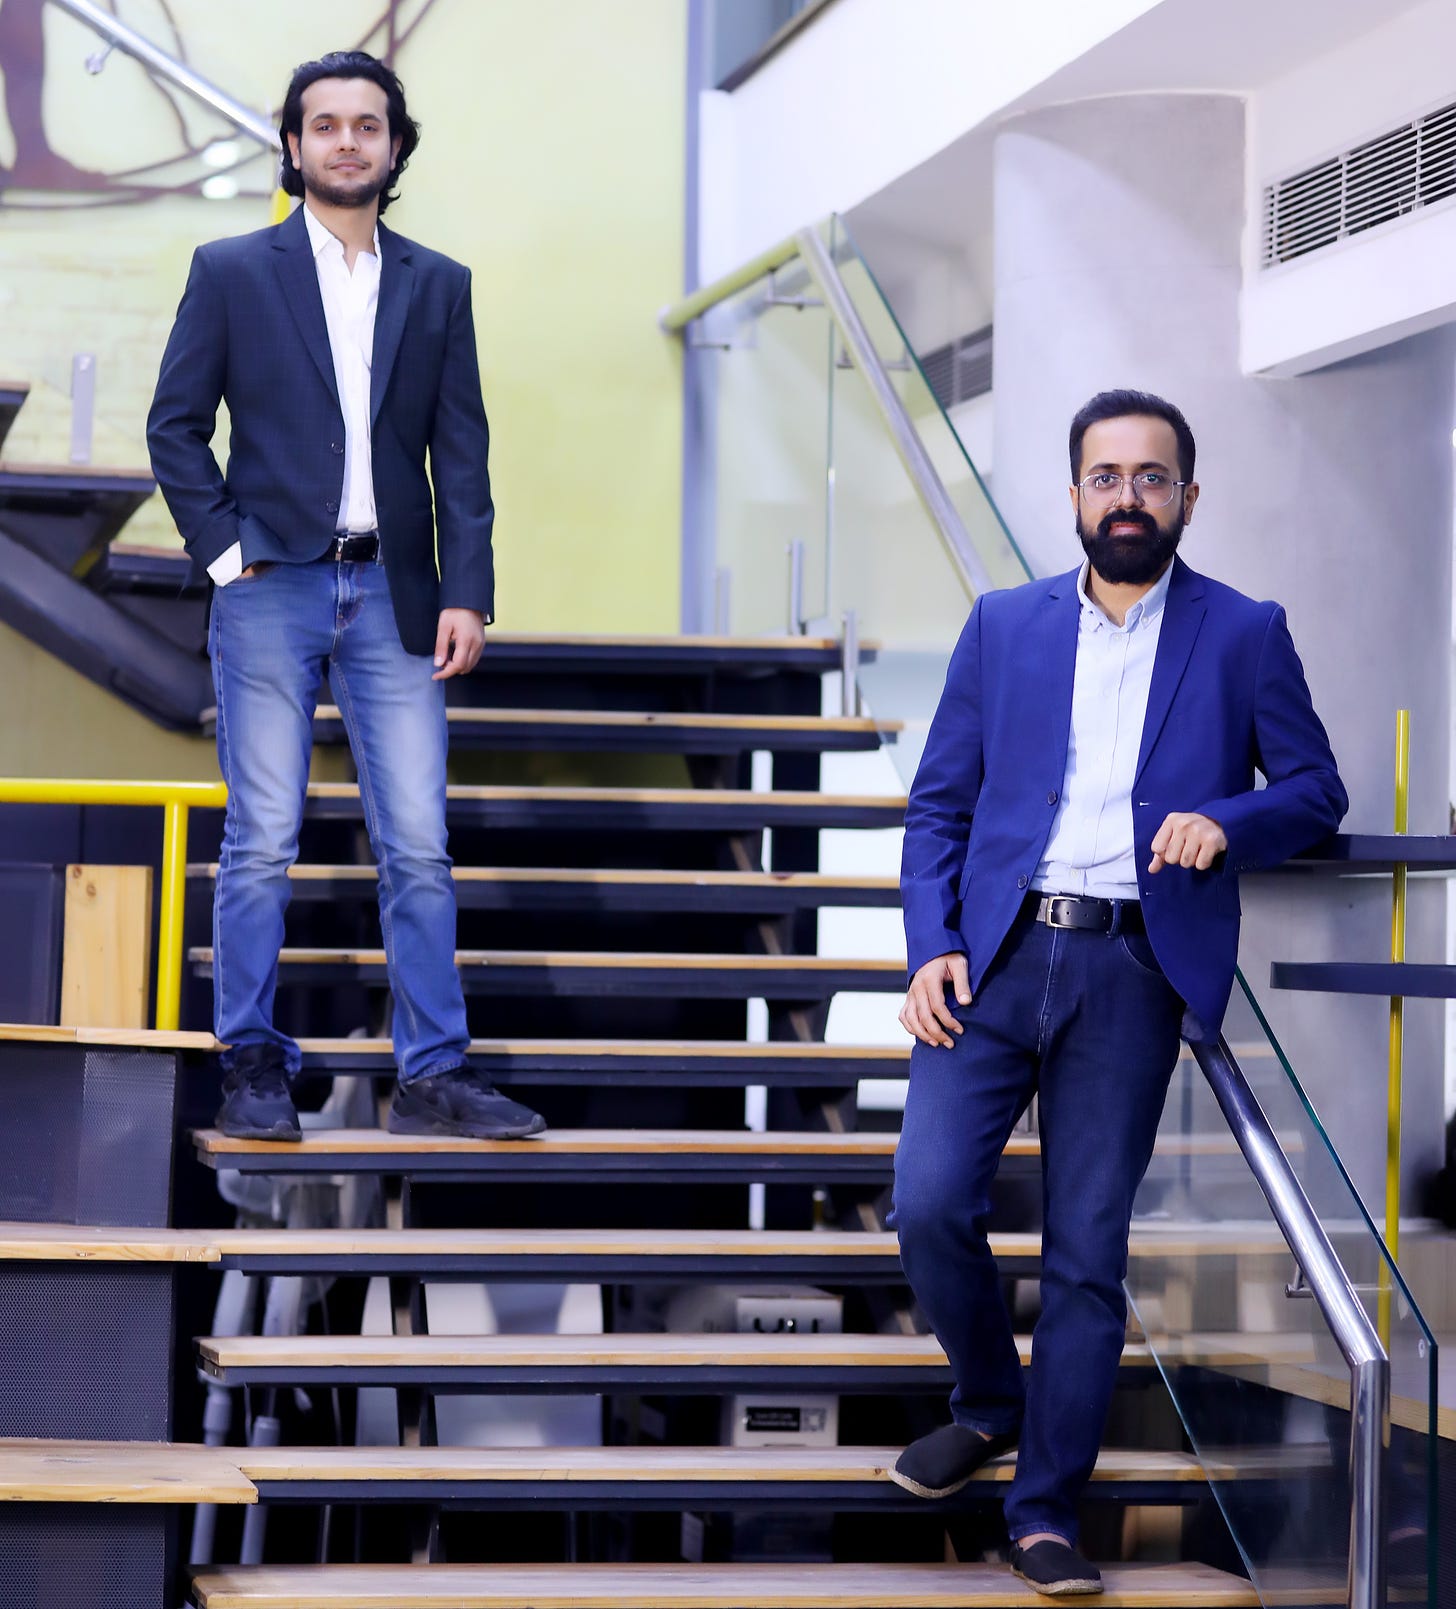 The co-founders of Legistify standing on a staircase